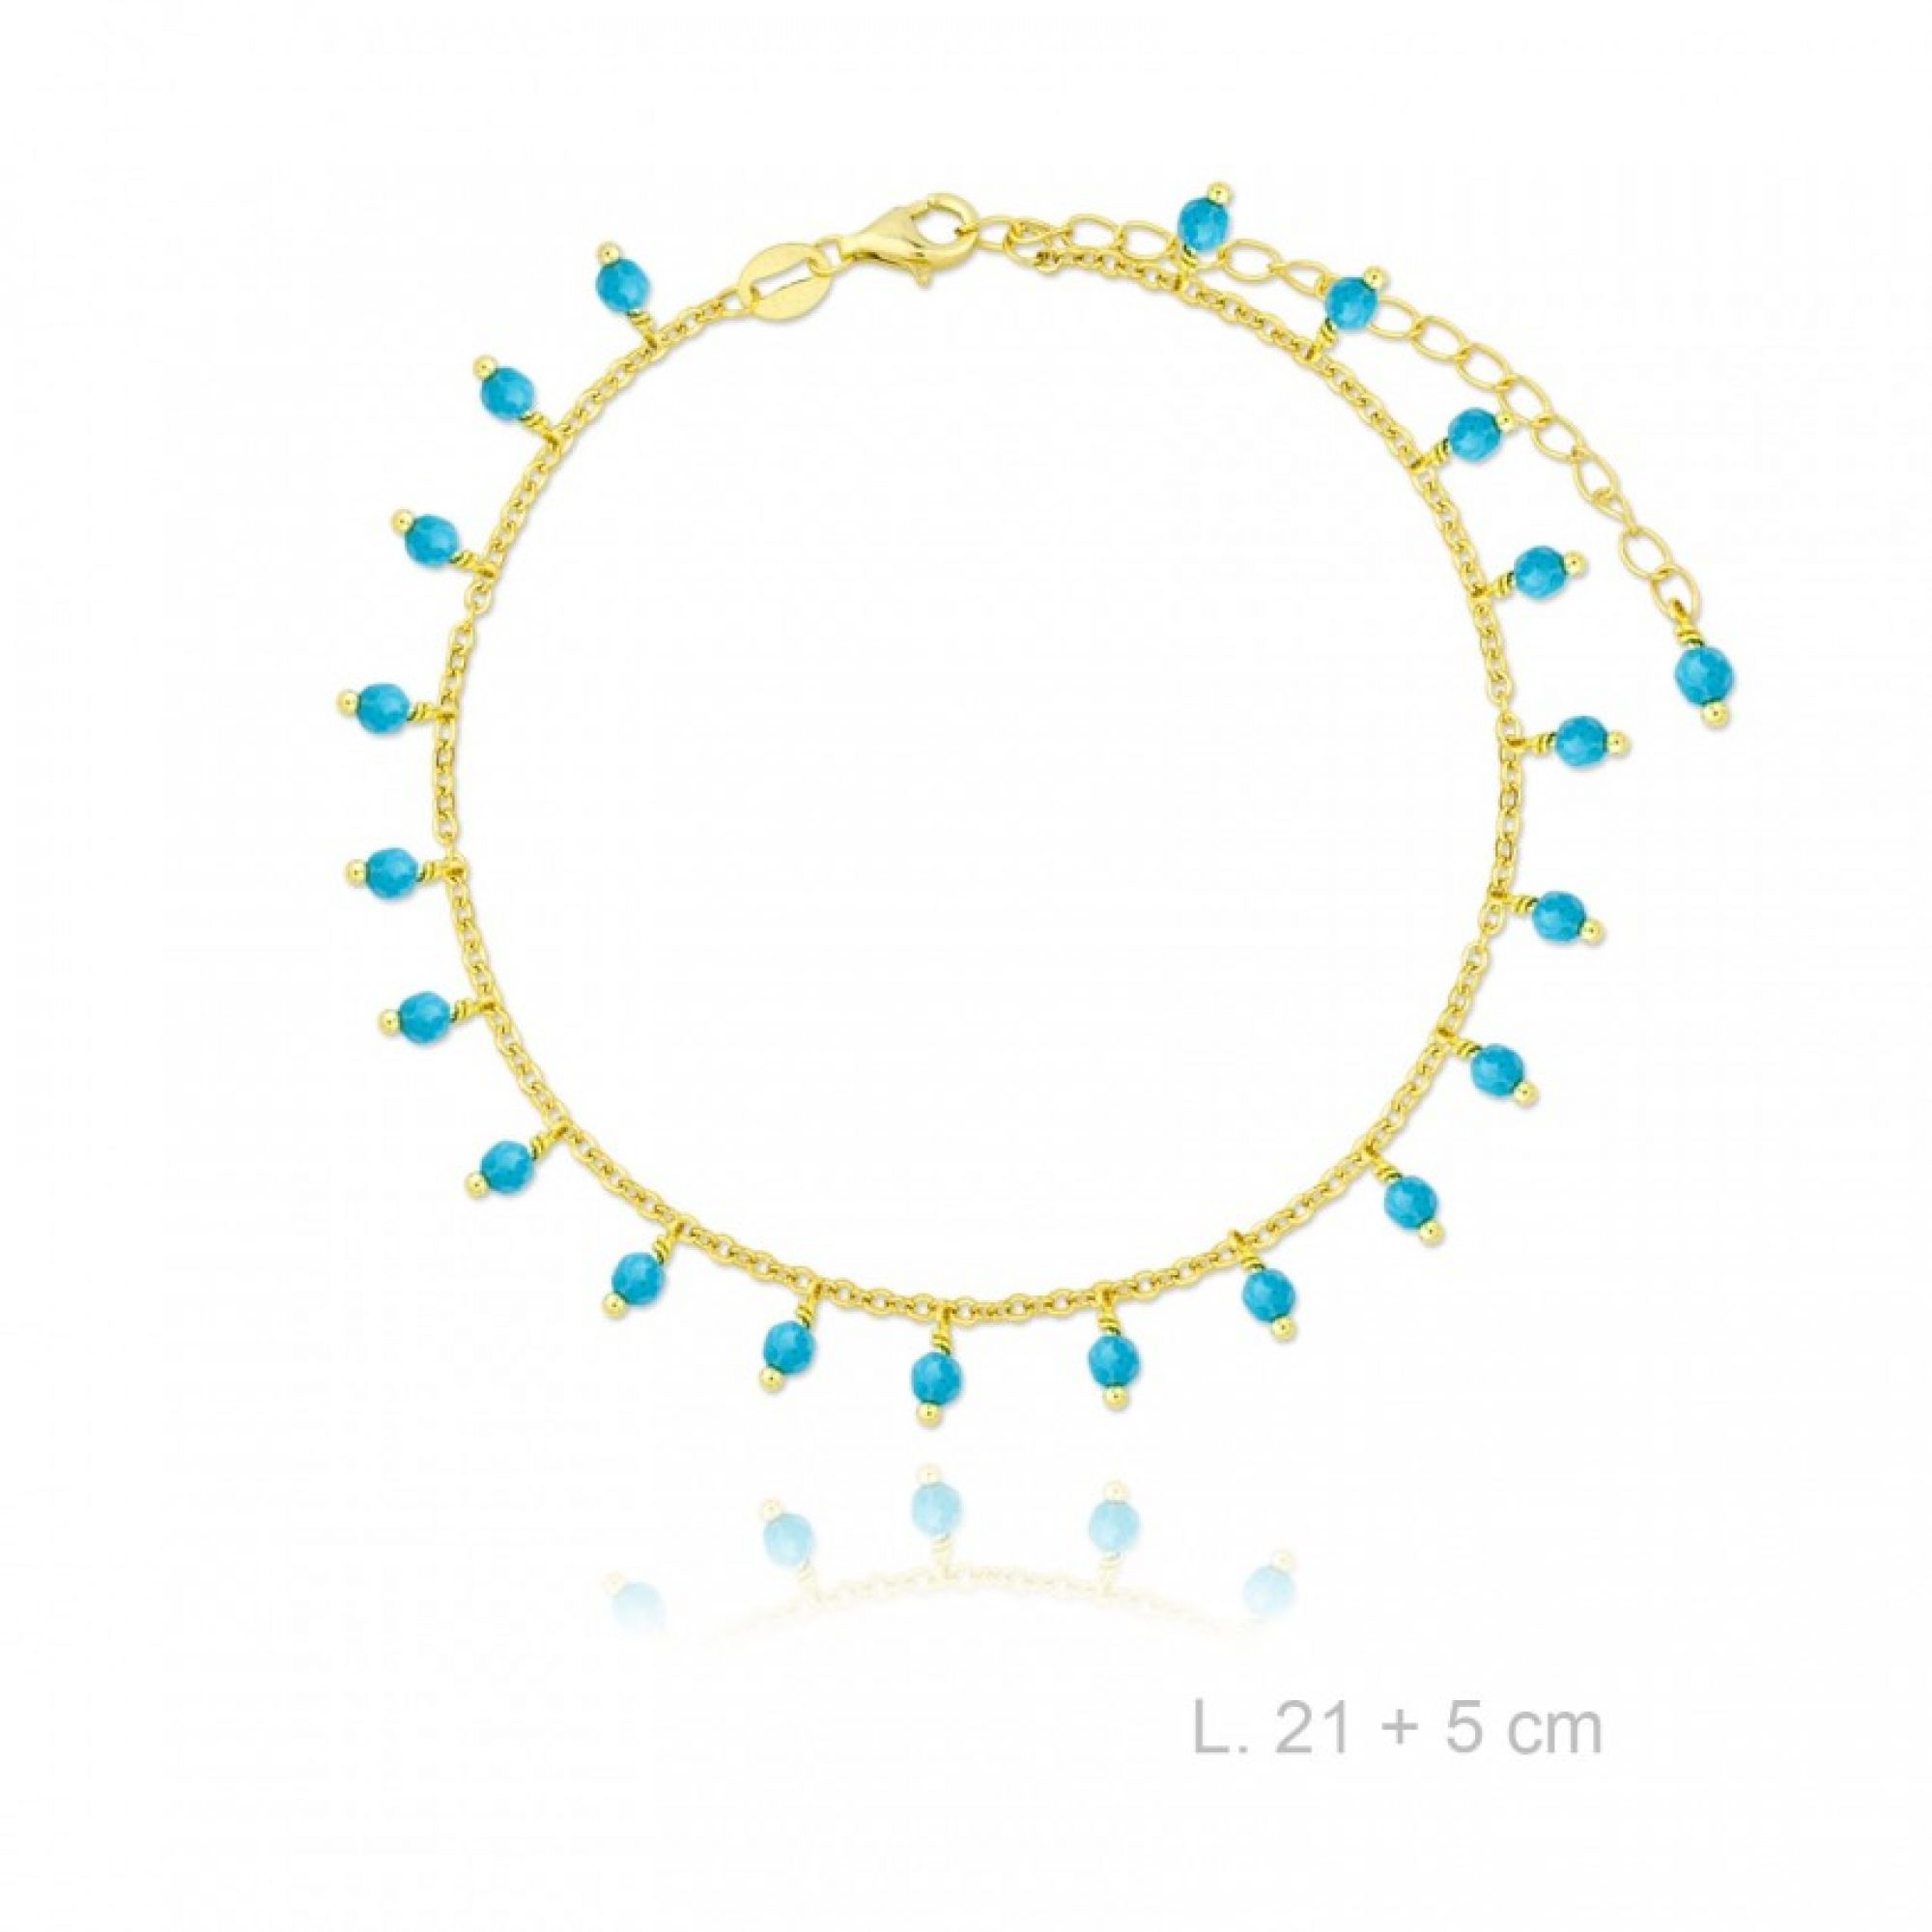 Gold plated anklet with dangles